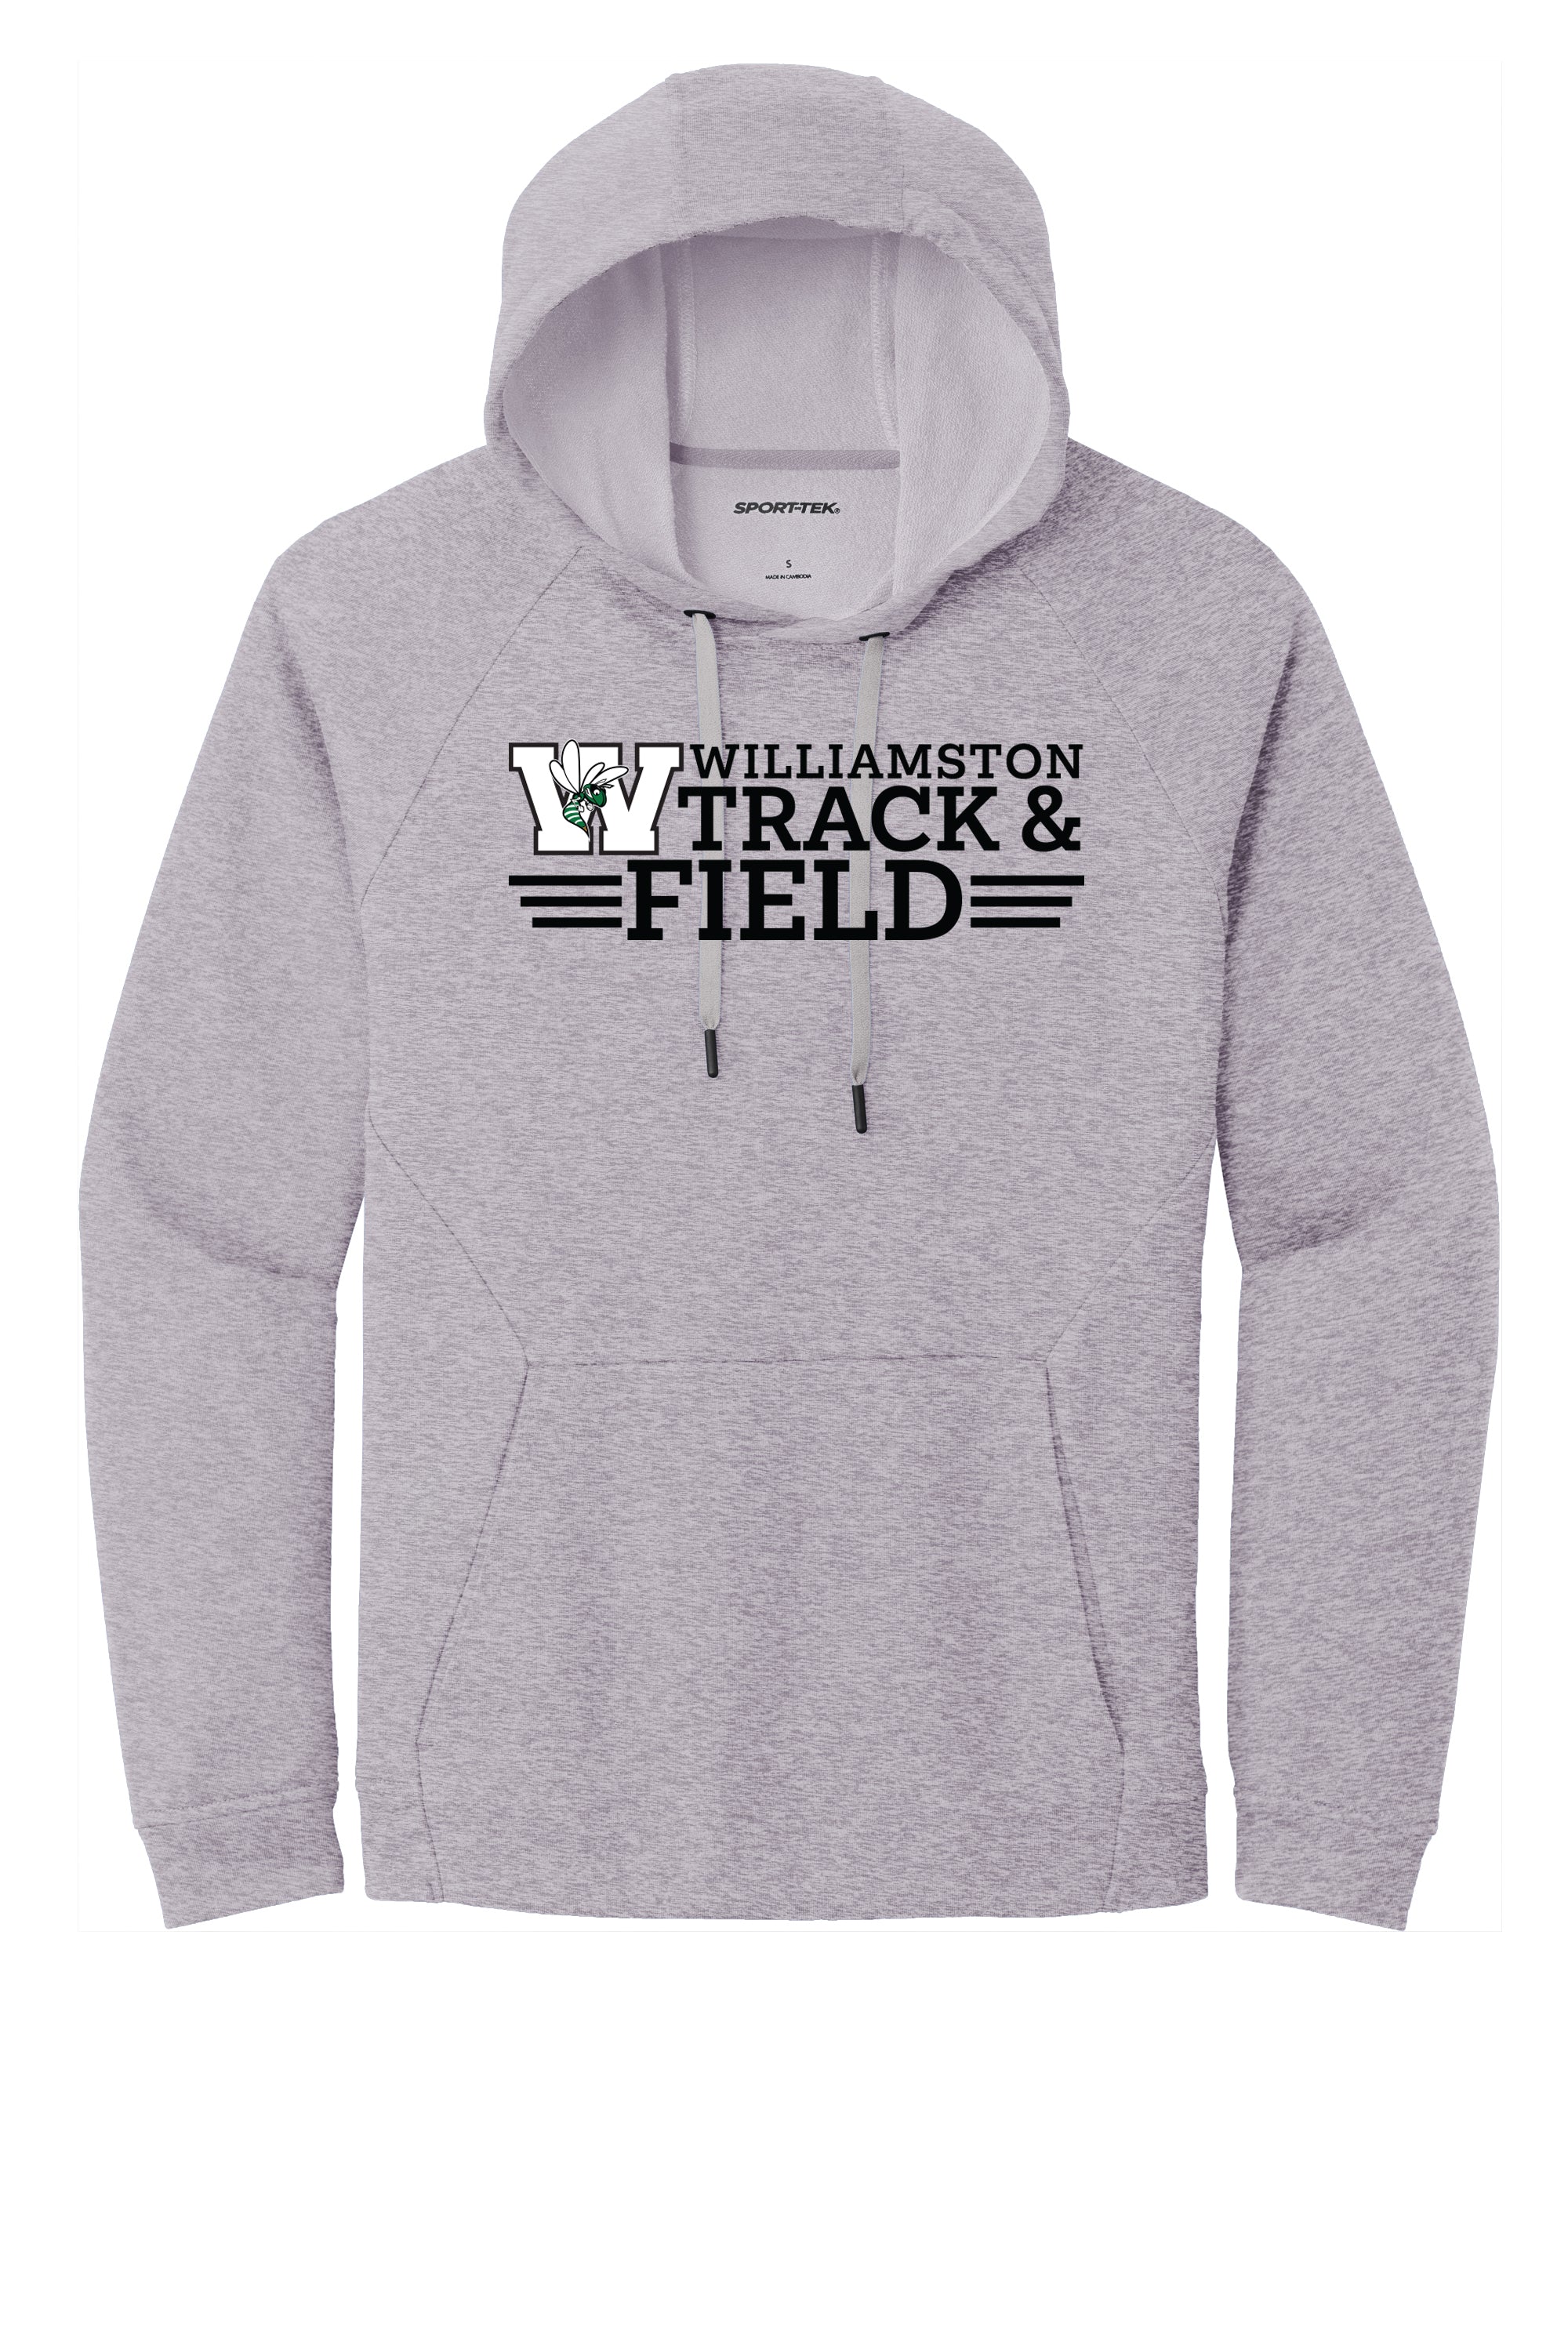 Williamston Track and Field - Lightweight Pullover Hoodie